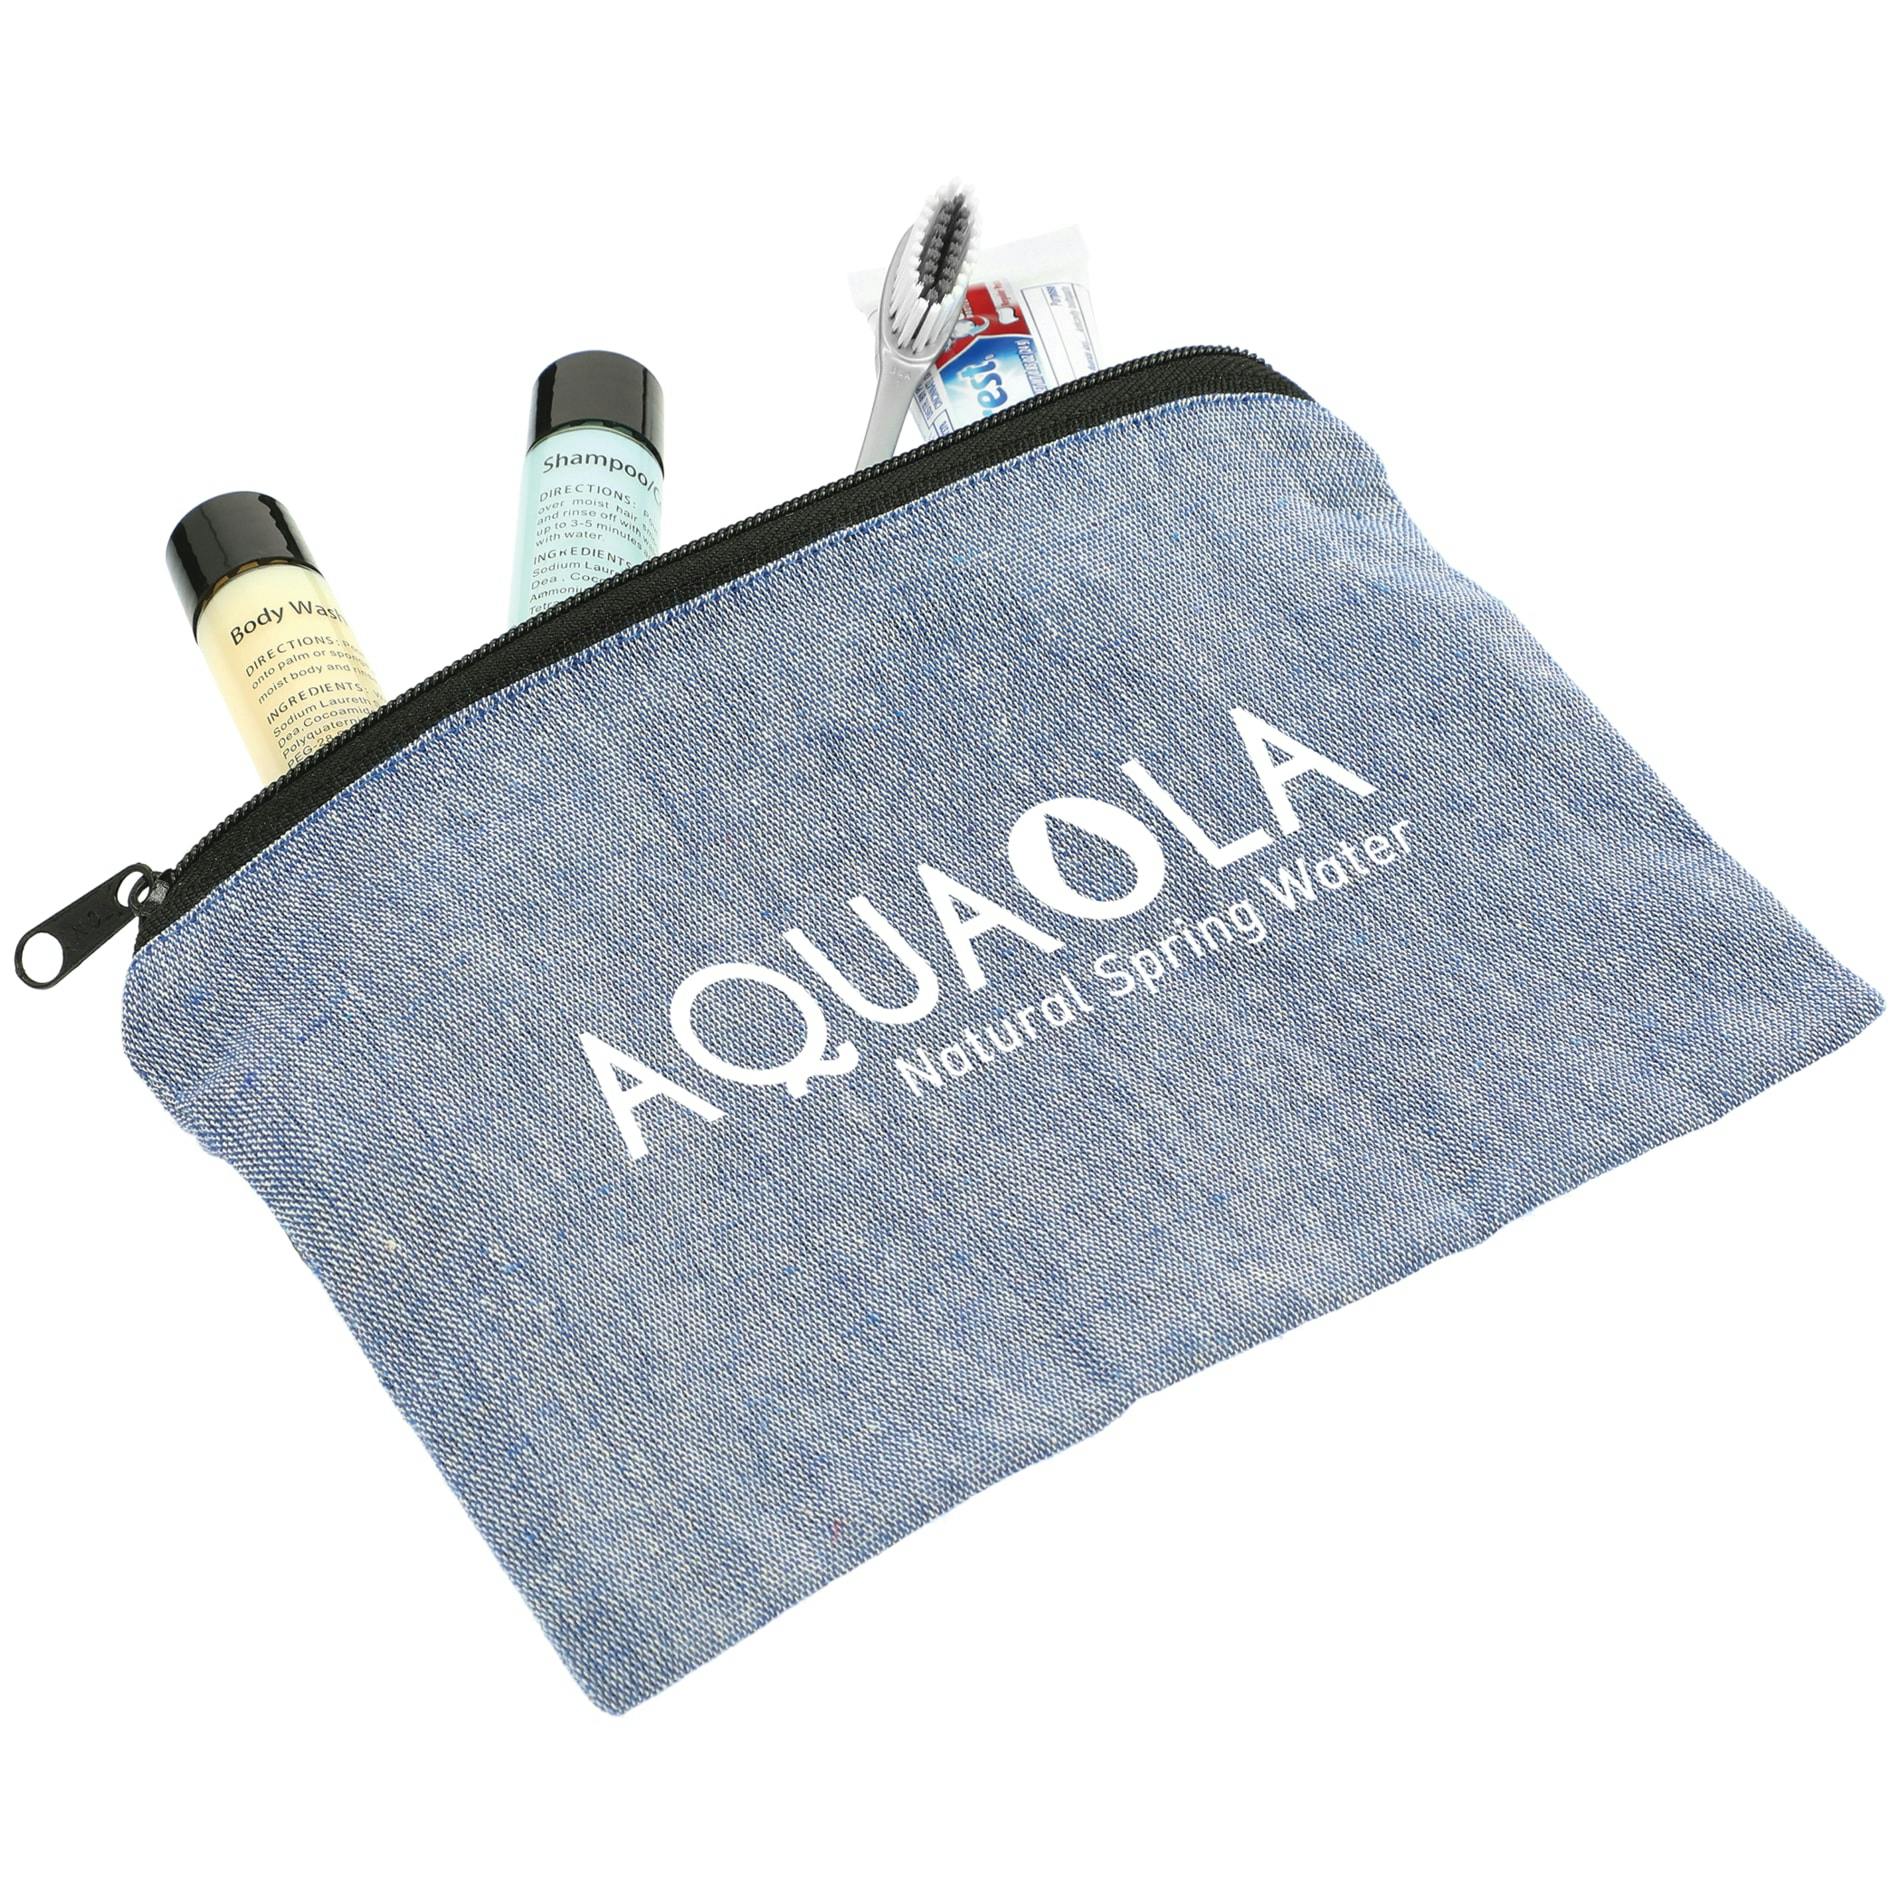 Recycled 5oz Cotton Twill Pouch - additional Image 8